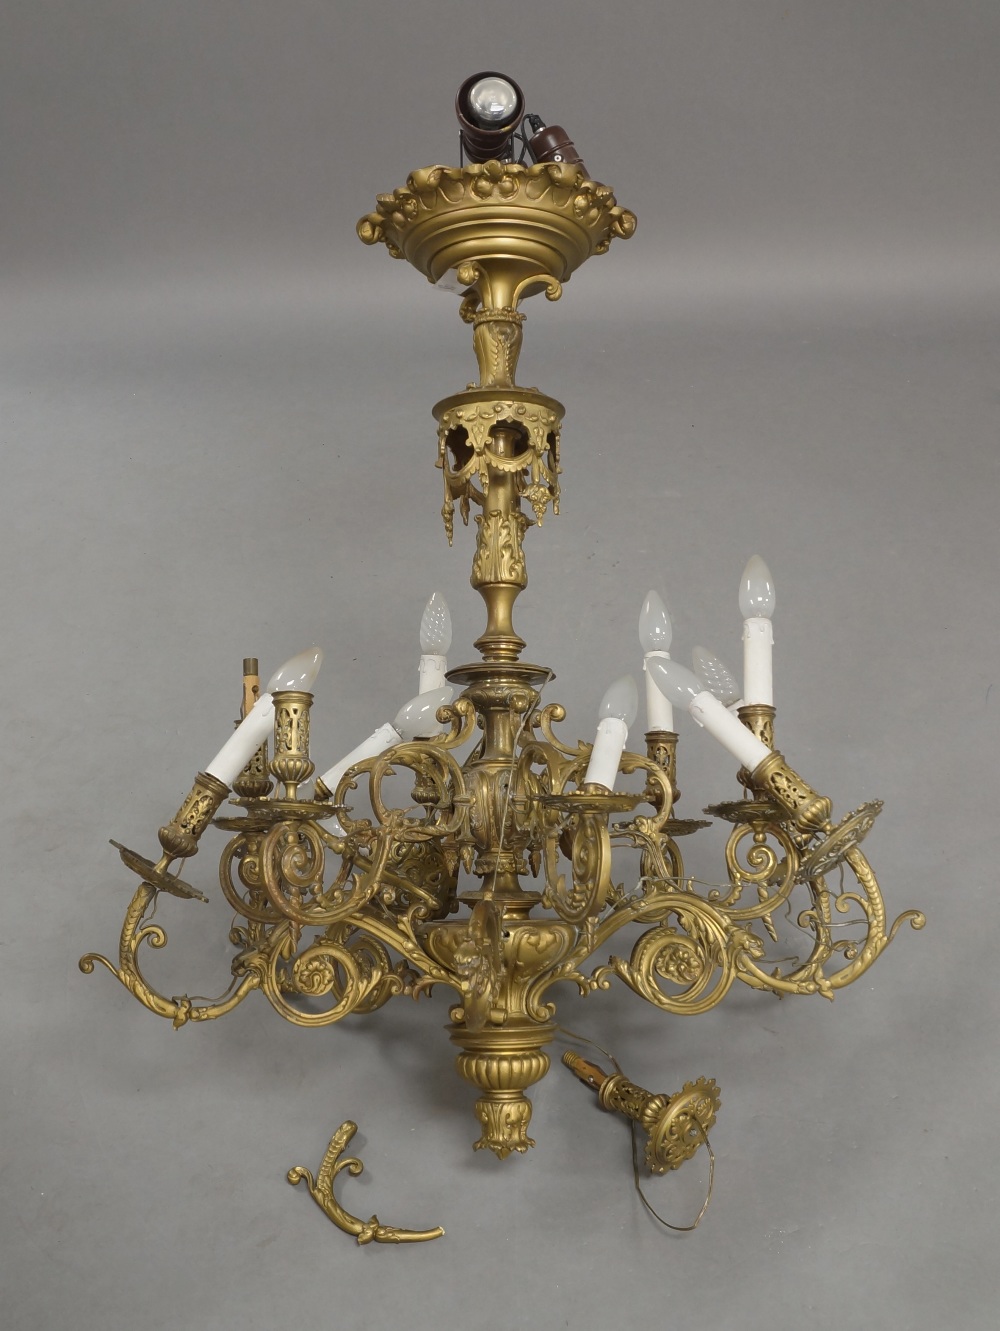 Fabulous Gilt French Light. 10 arms and will be restored and rewired. Town and Country Antiques